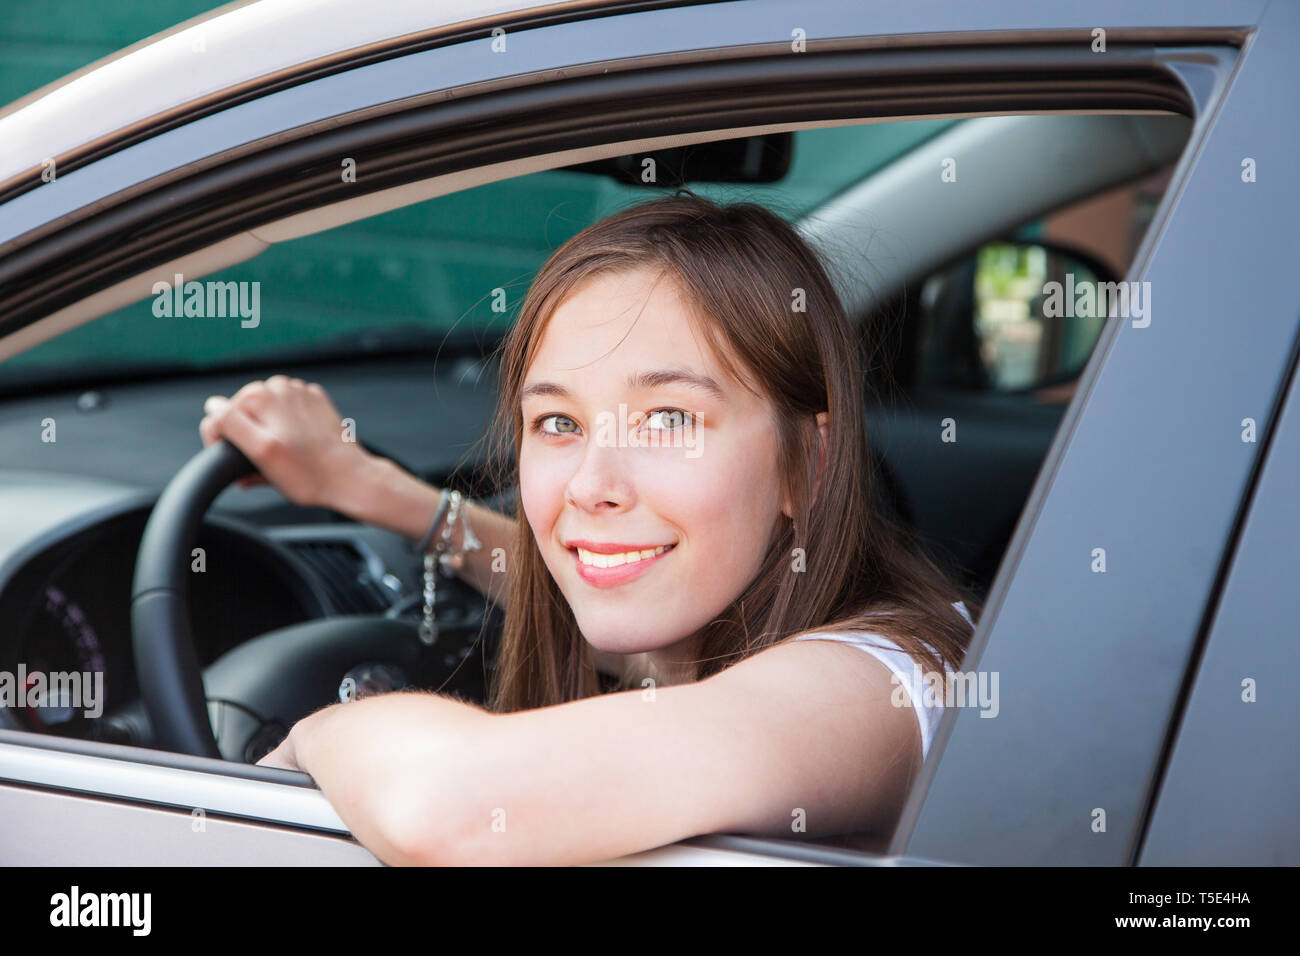 A teenage girl drives in a car Stock Photo